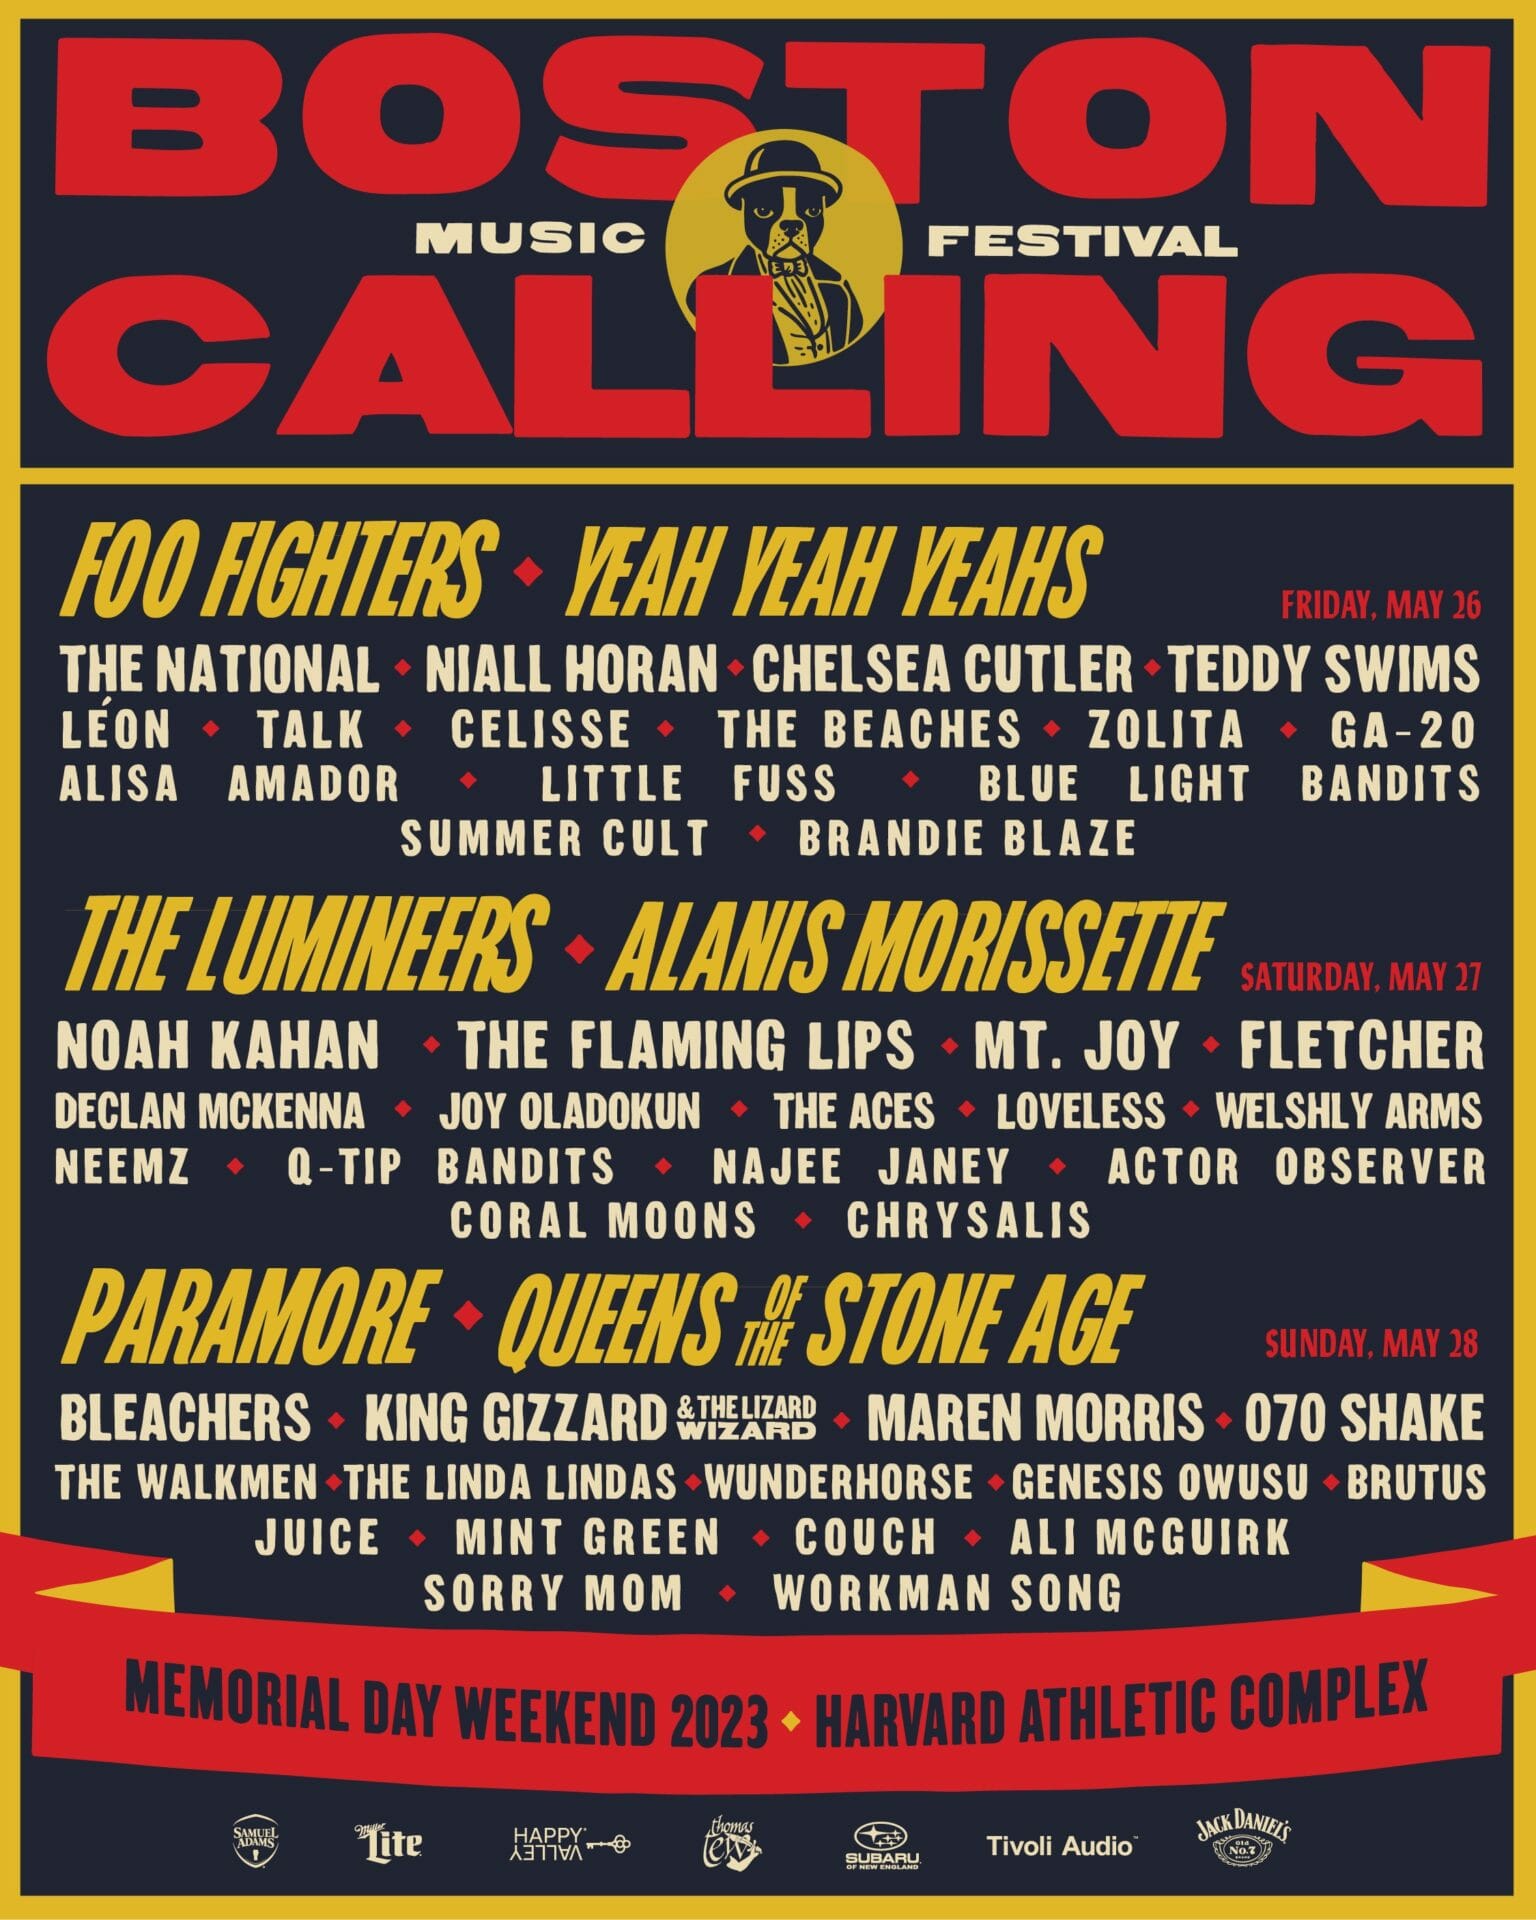 Boston Calling Music Festival Announces 2023 Lineup Foo Fighters, The